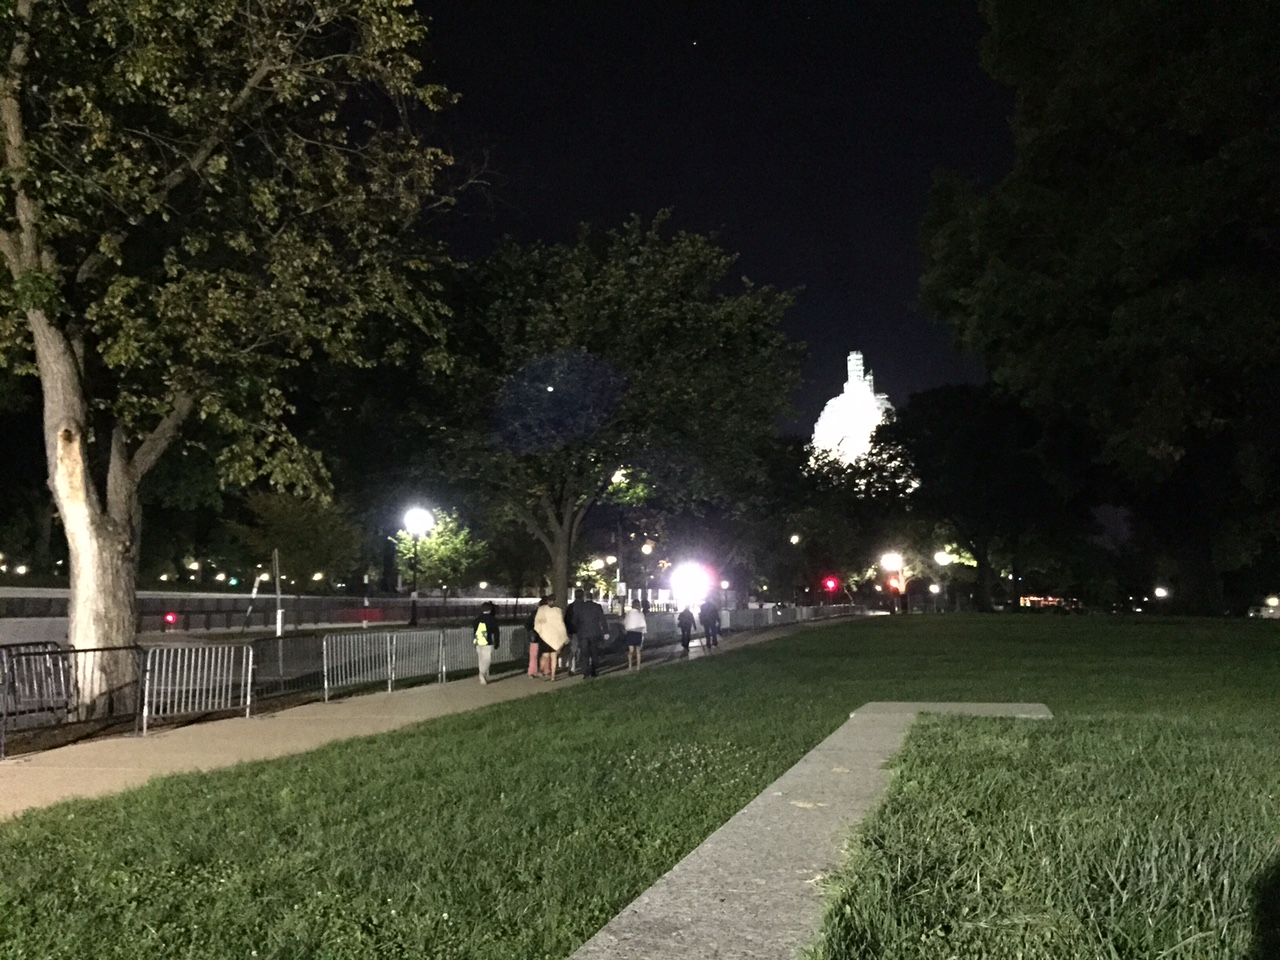 Visitors walk to the U.S. Capitol building, where Pope Francis will address Congress on Thursday, Sept. 24, 2015. (WTOP/Dennis Foley)